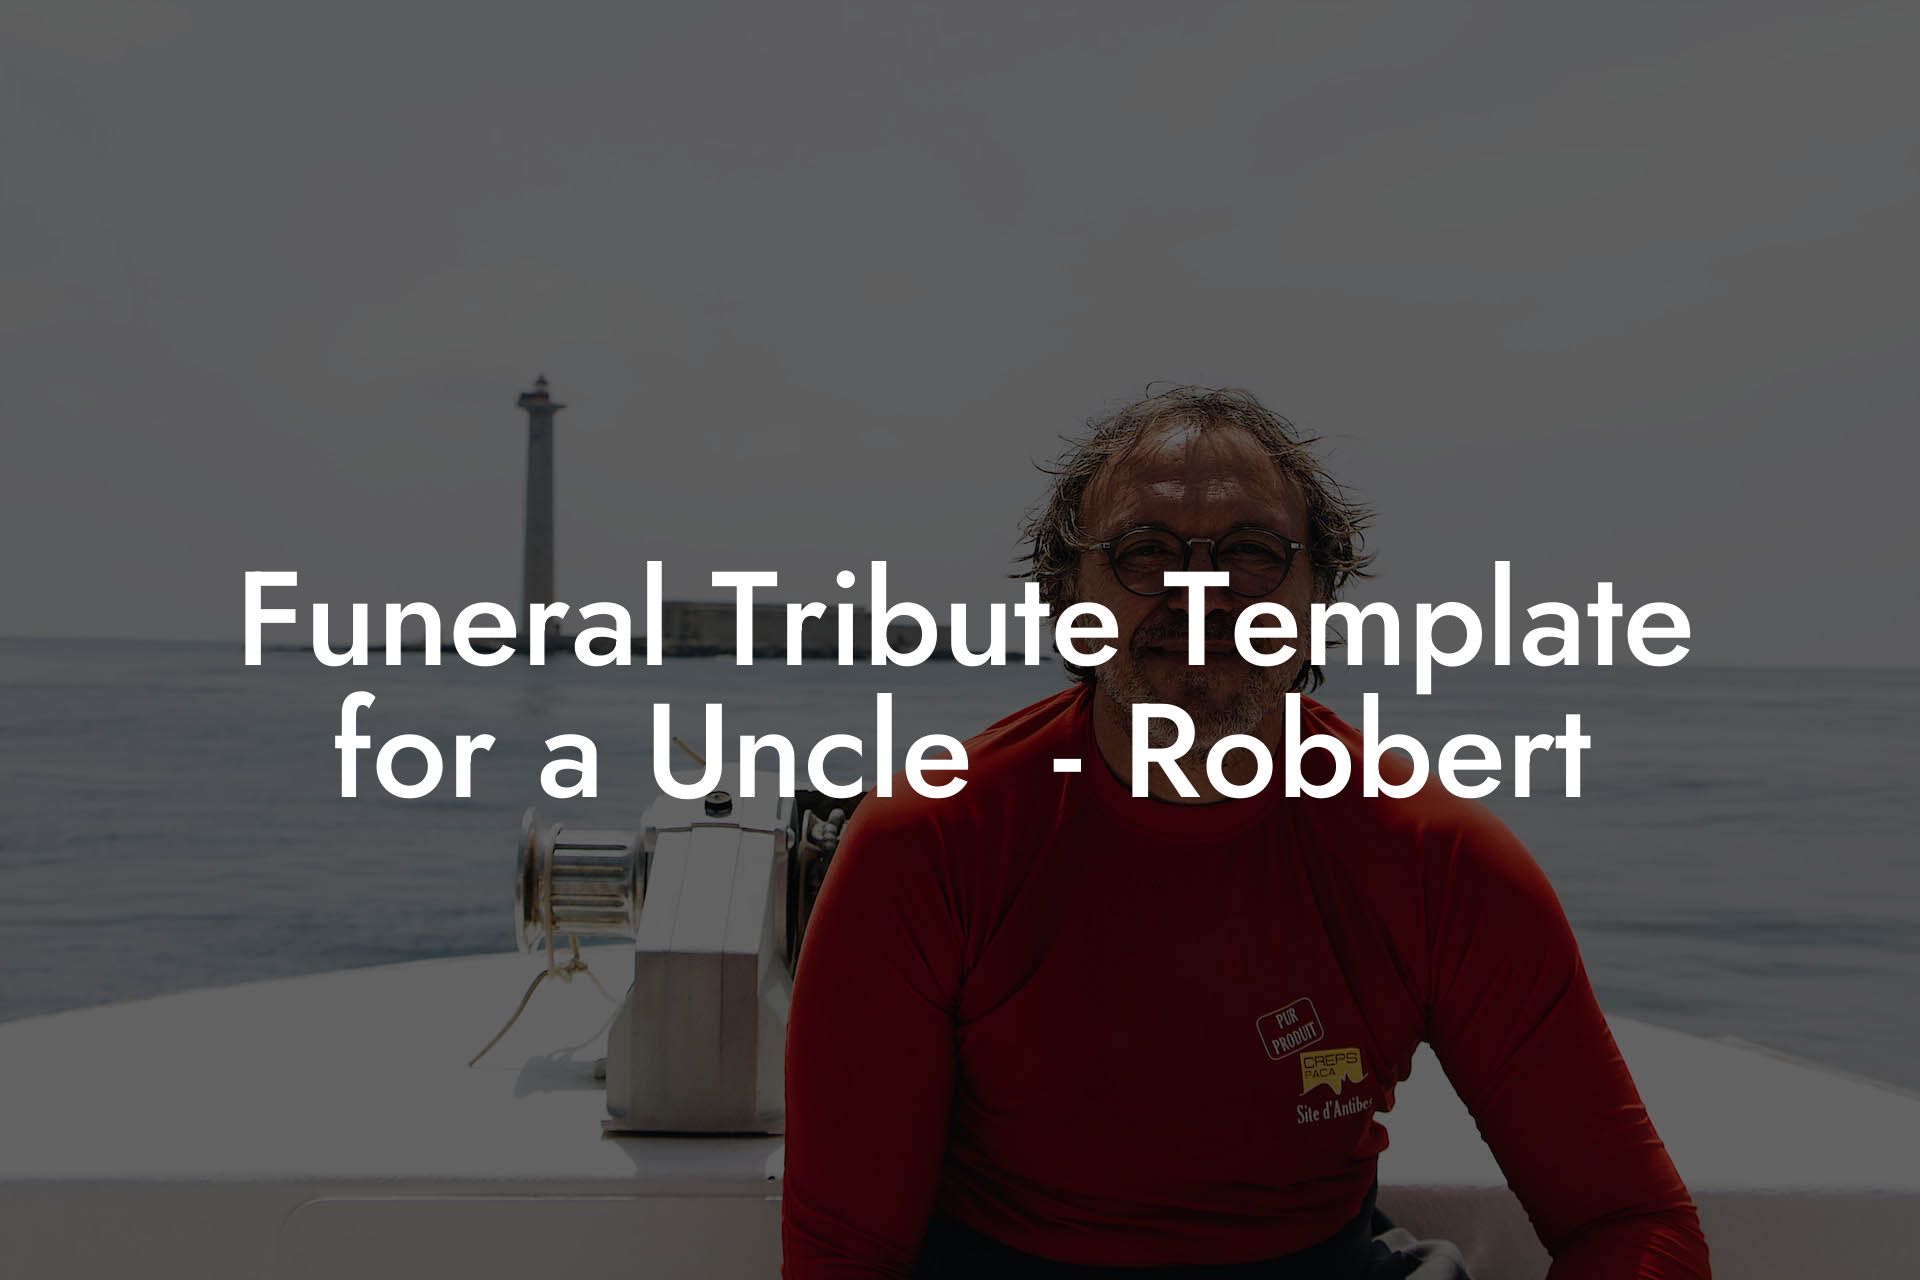 Funeral Tribute Template for a Uncle  - Robbert